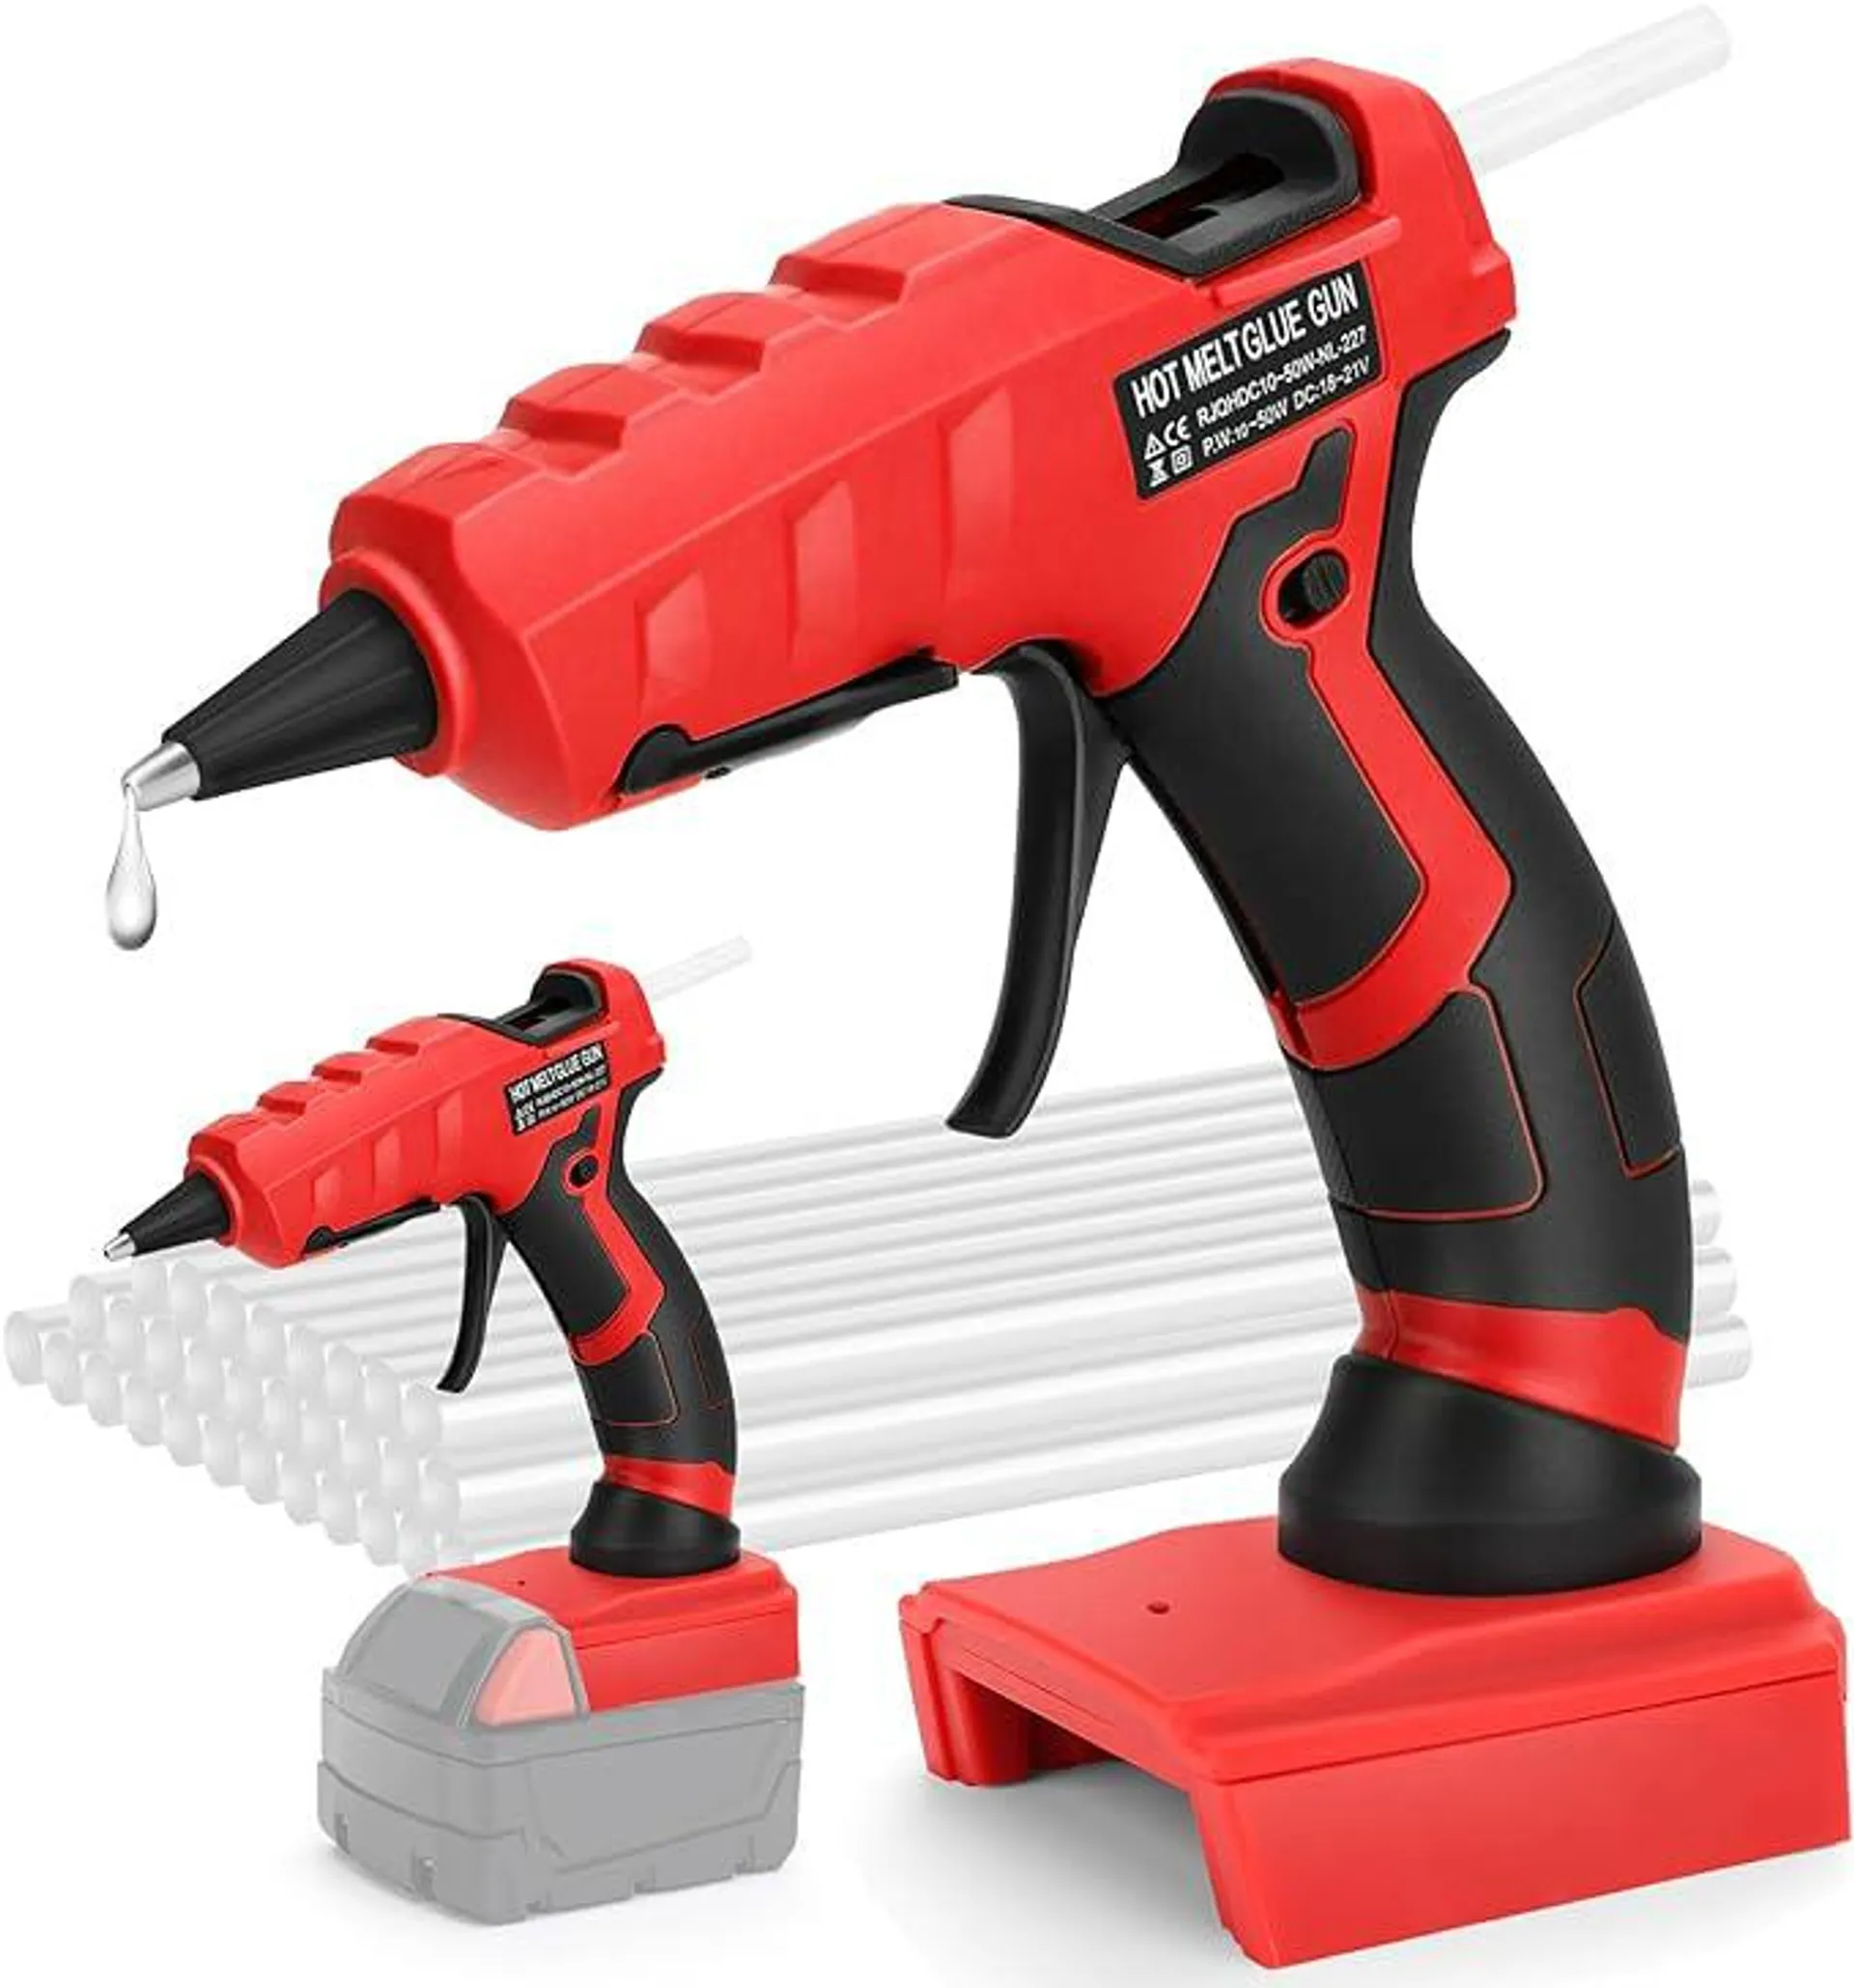 Cordless Hot Glue Gun for Milwaukee 18V M18 Battery, Hot Glue Gun Kit for Milwaukee Tools in Crafting, Wood, PVC, Glass, Home Repair with 30 Pcs 0.27 * 5.9 inch Hot Glue Sticks (Battery Not Included)